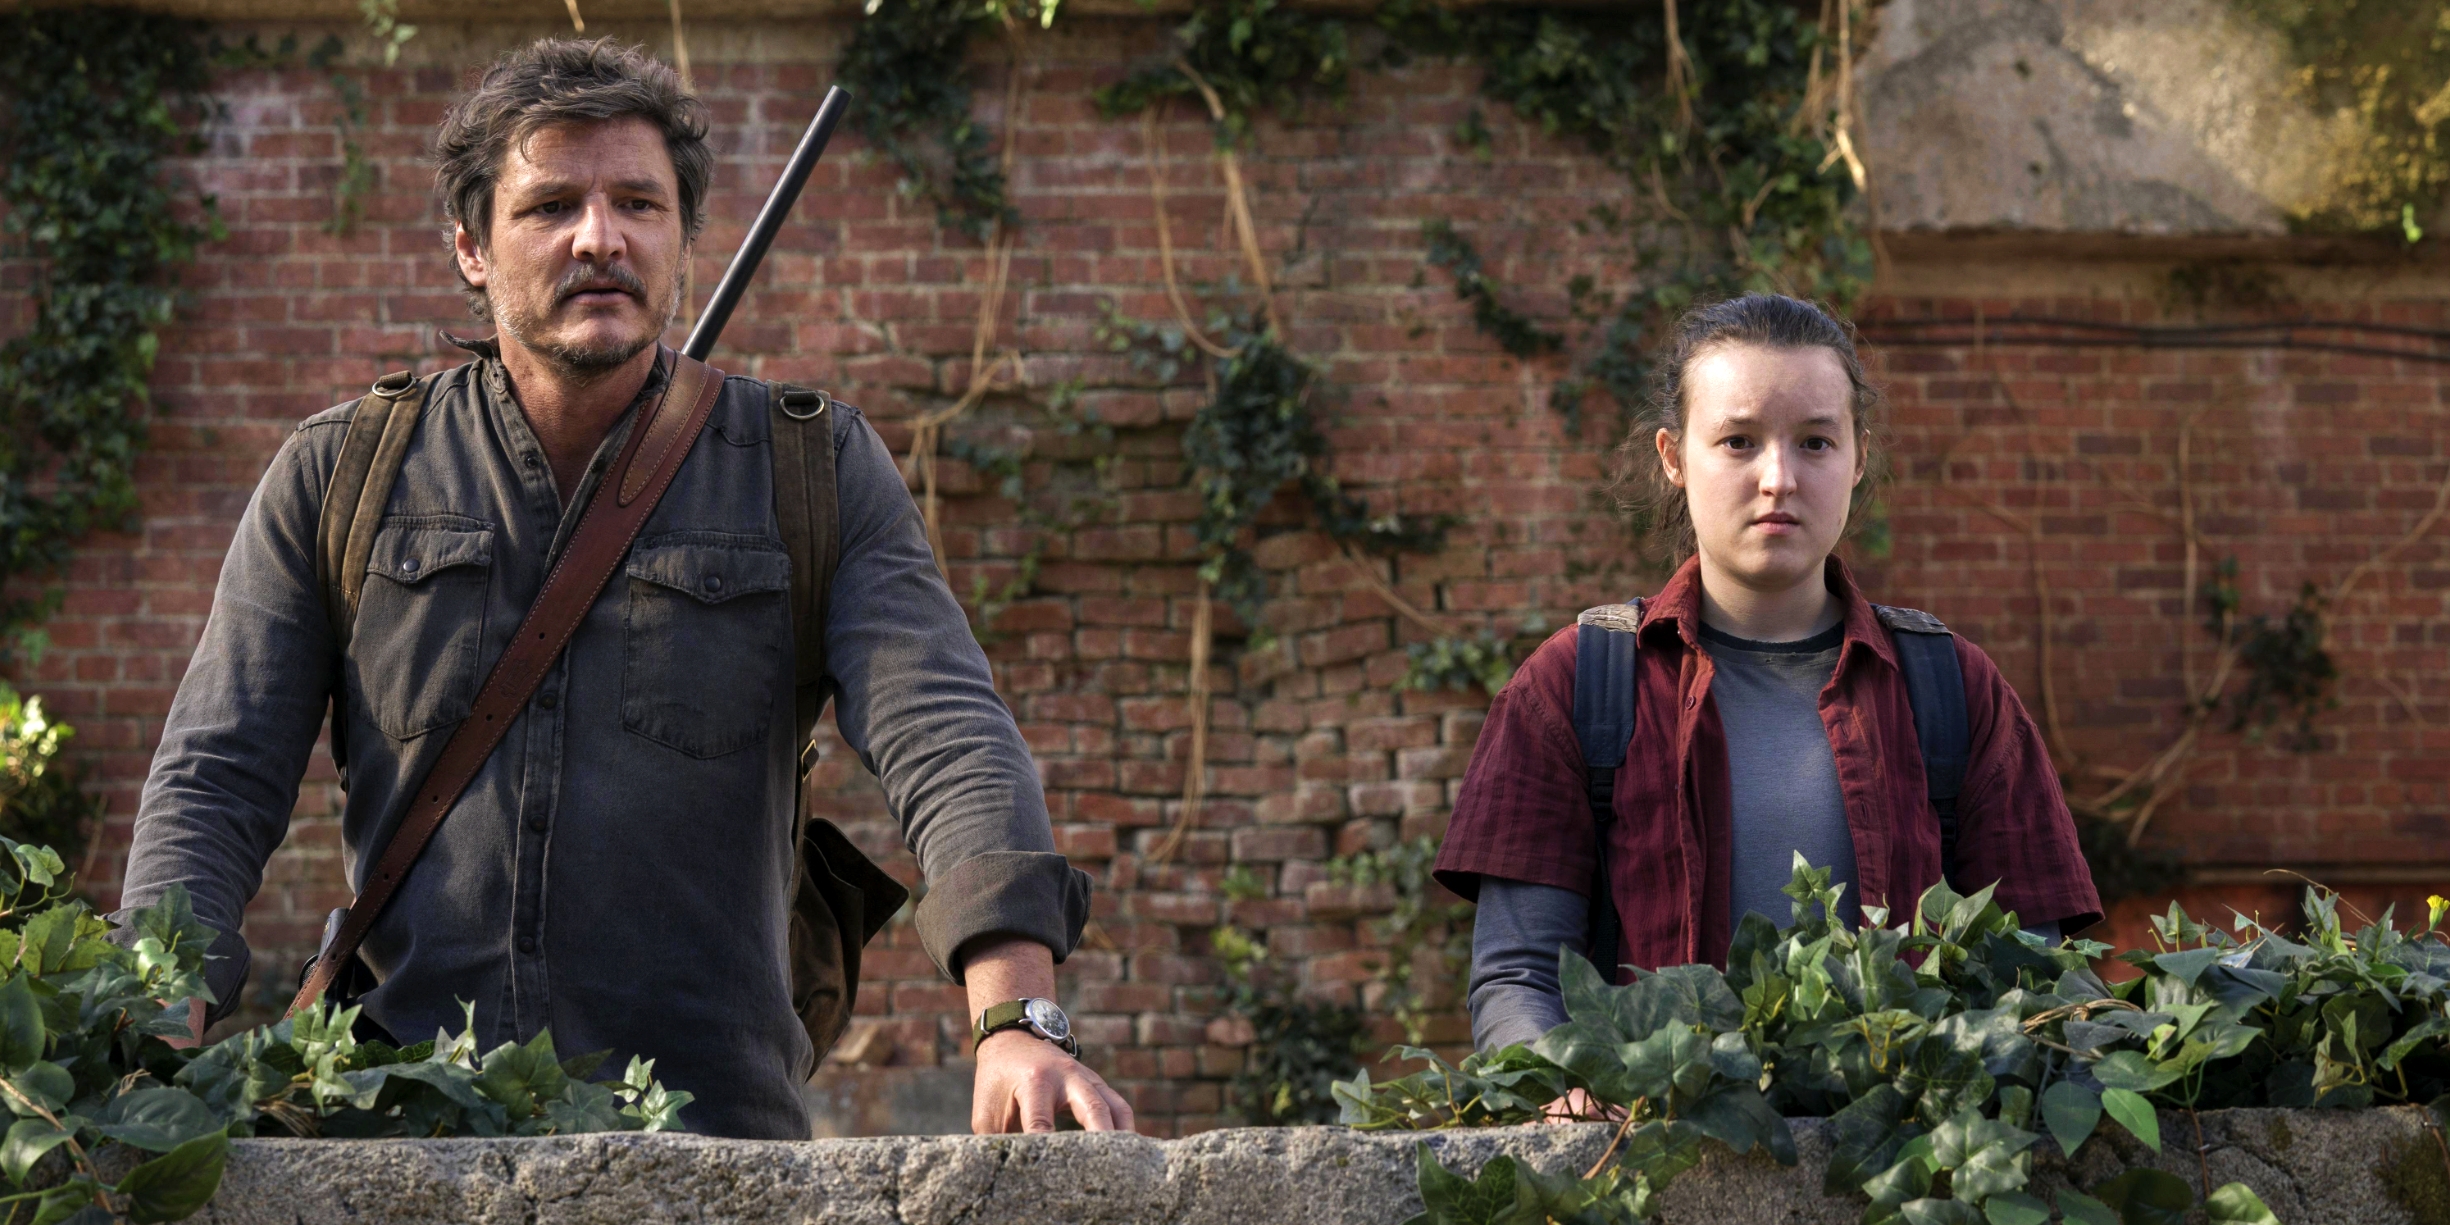 The Best Online Reactions To The Final Episode Of The Last Of Us